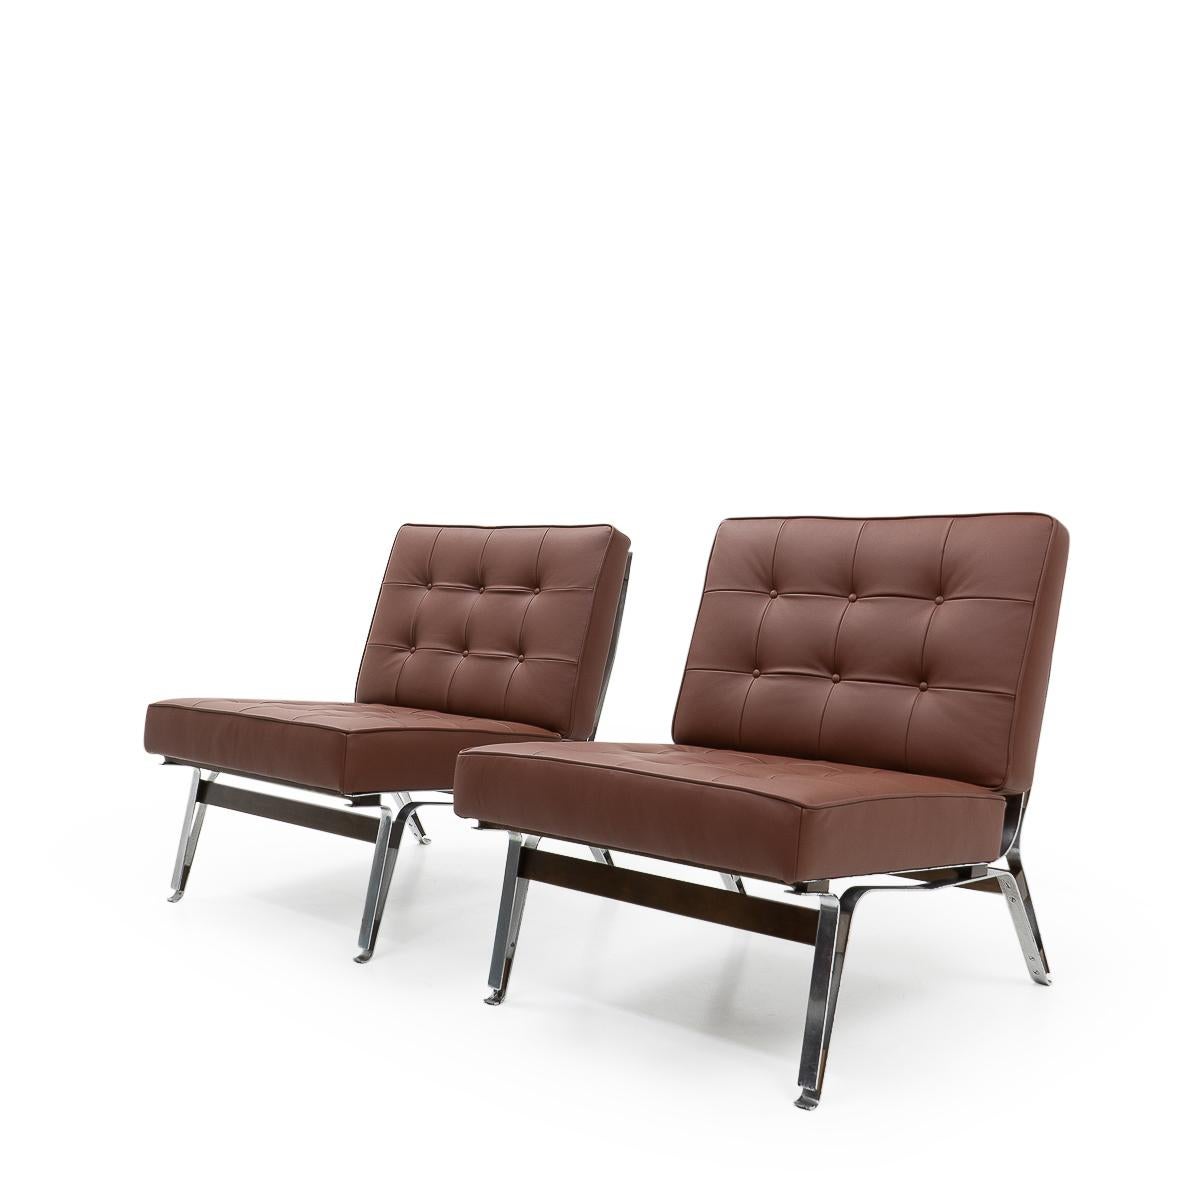 Mid-Century Modern Rare Italian Design: Ico Parisi 856 Lounge Chairs for Cassina, 1950s For Sale